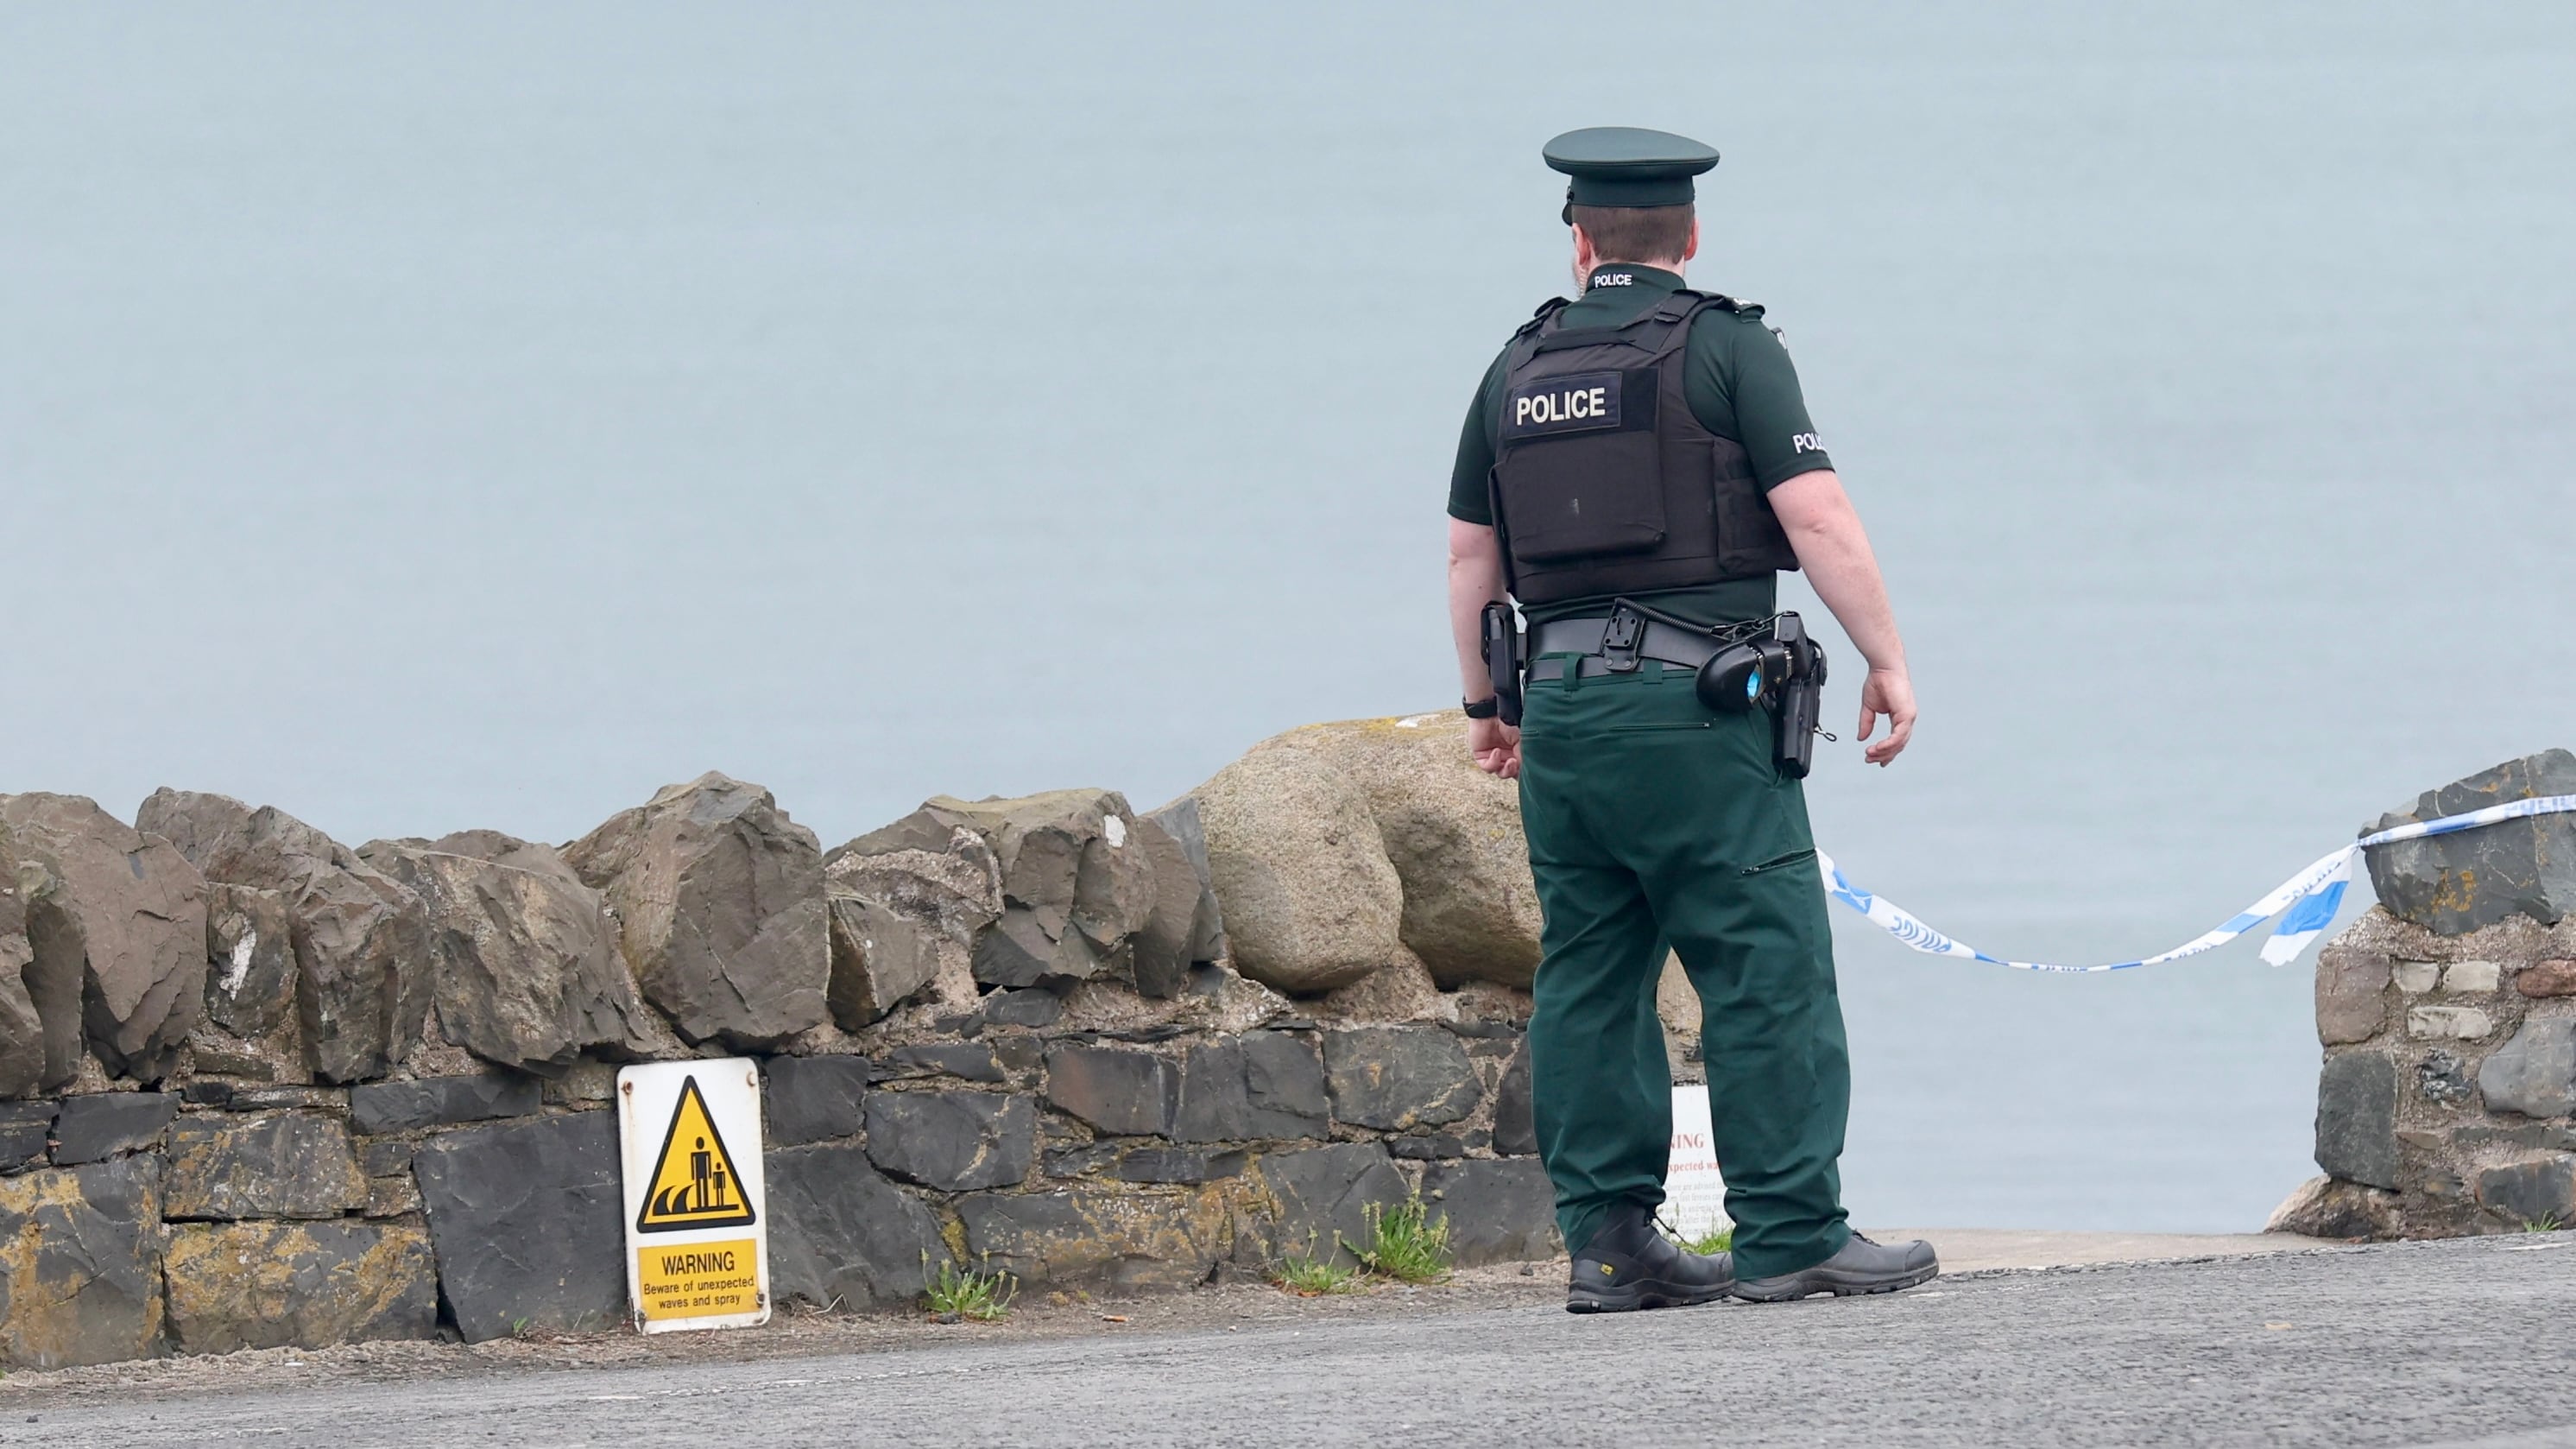 Police at the scene after a woman’s body was found on a beach in Cultra.
PICTURE COLM LENAGHAN